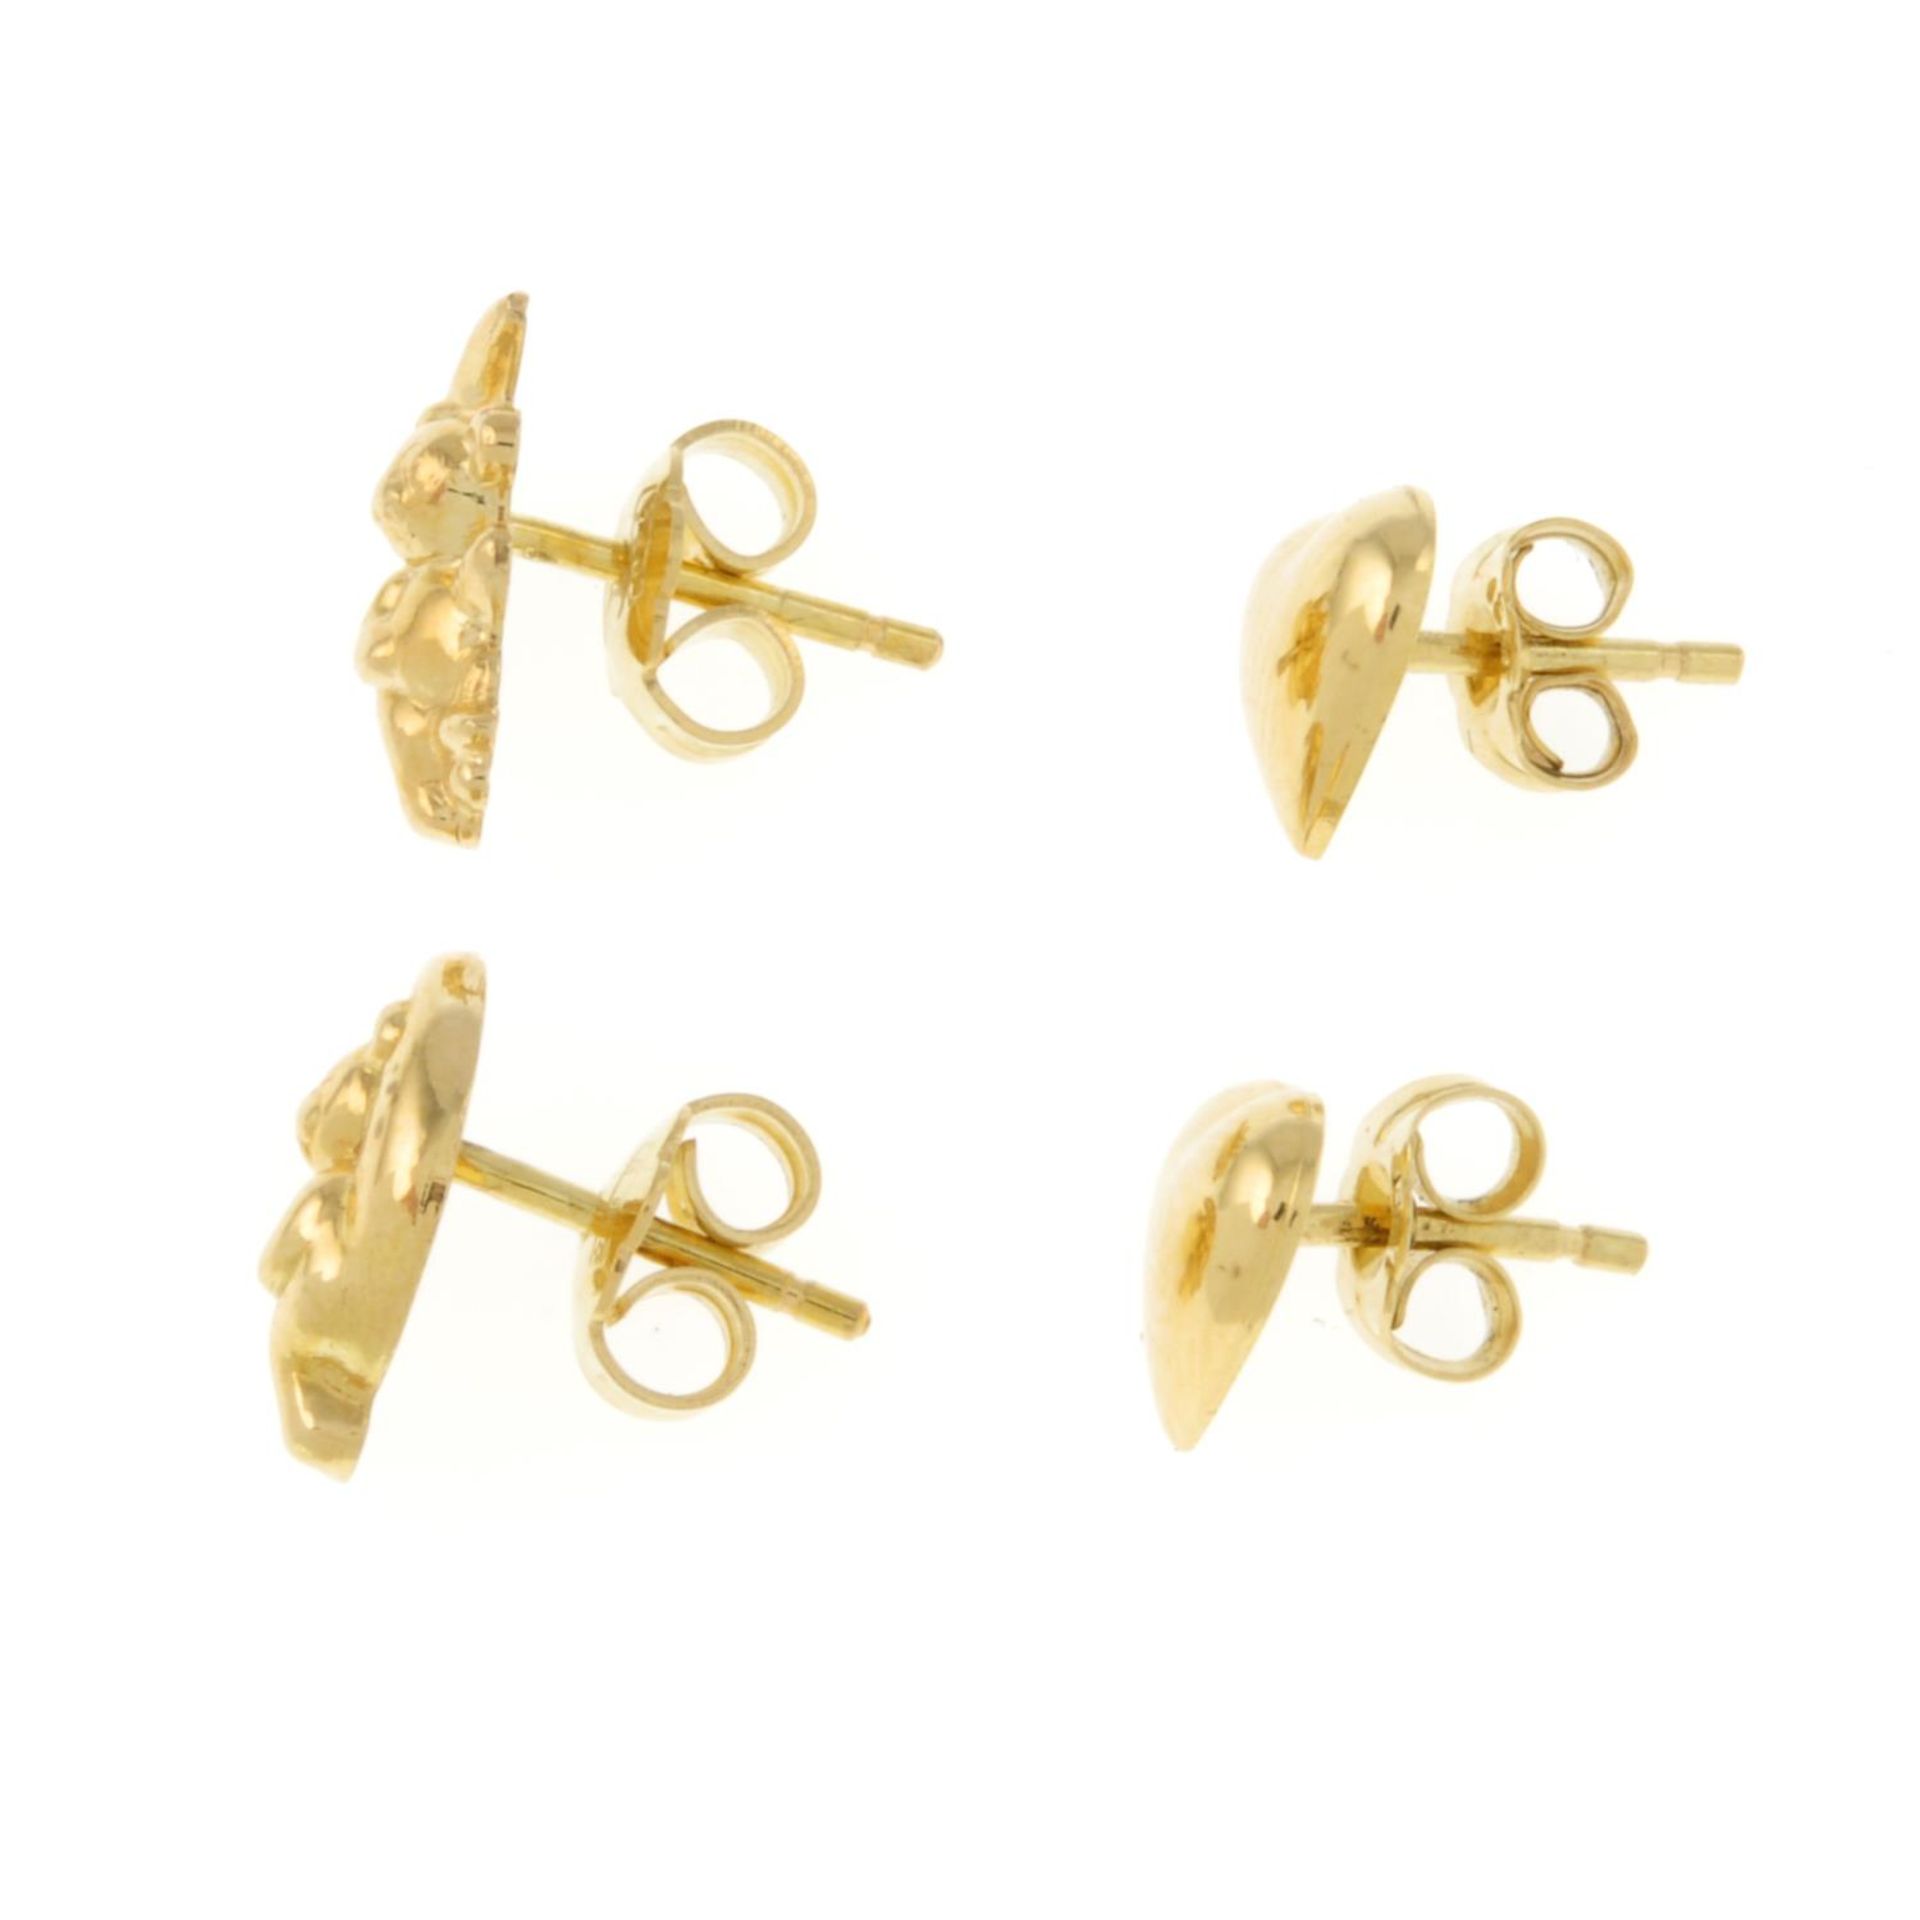 Two pairs of 18ct gold stud earrings.Hallmarks for Italy.Lengths 0.8 and 1.1cms. - Image 2 of 2